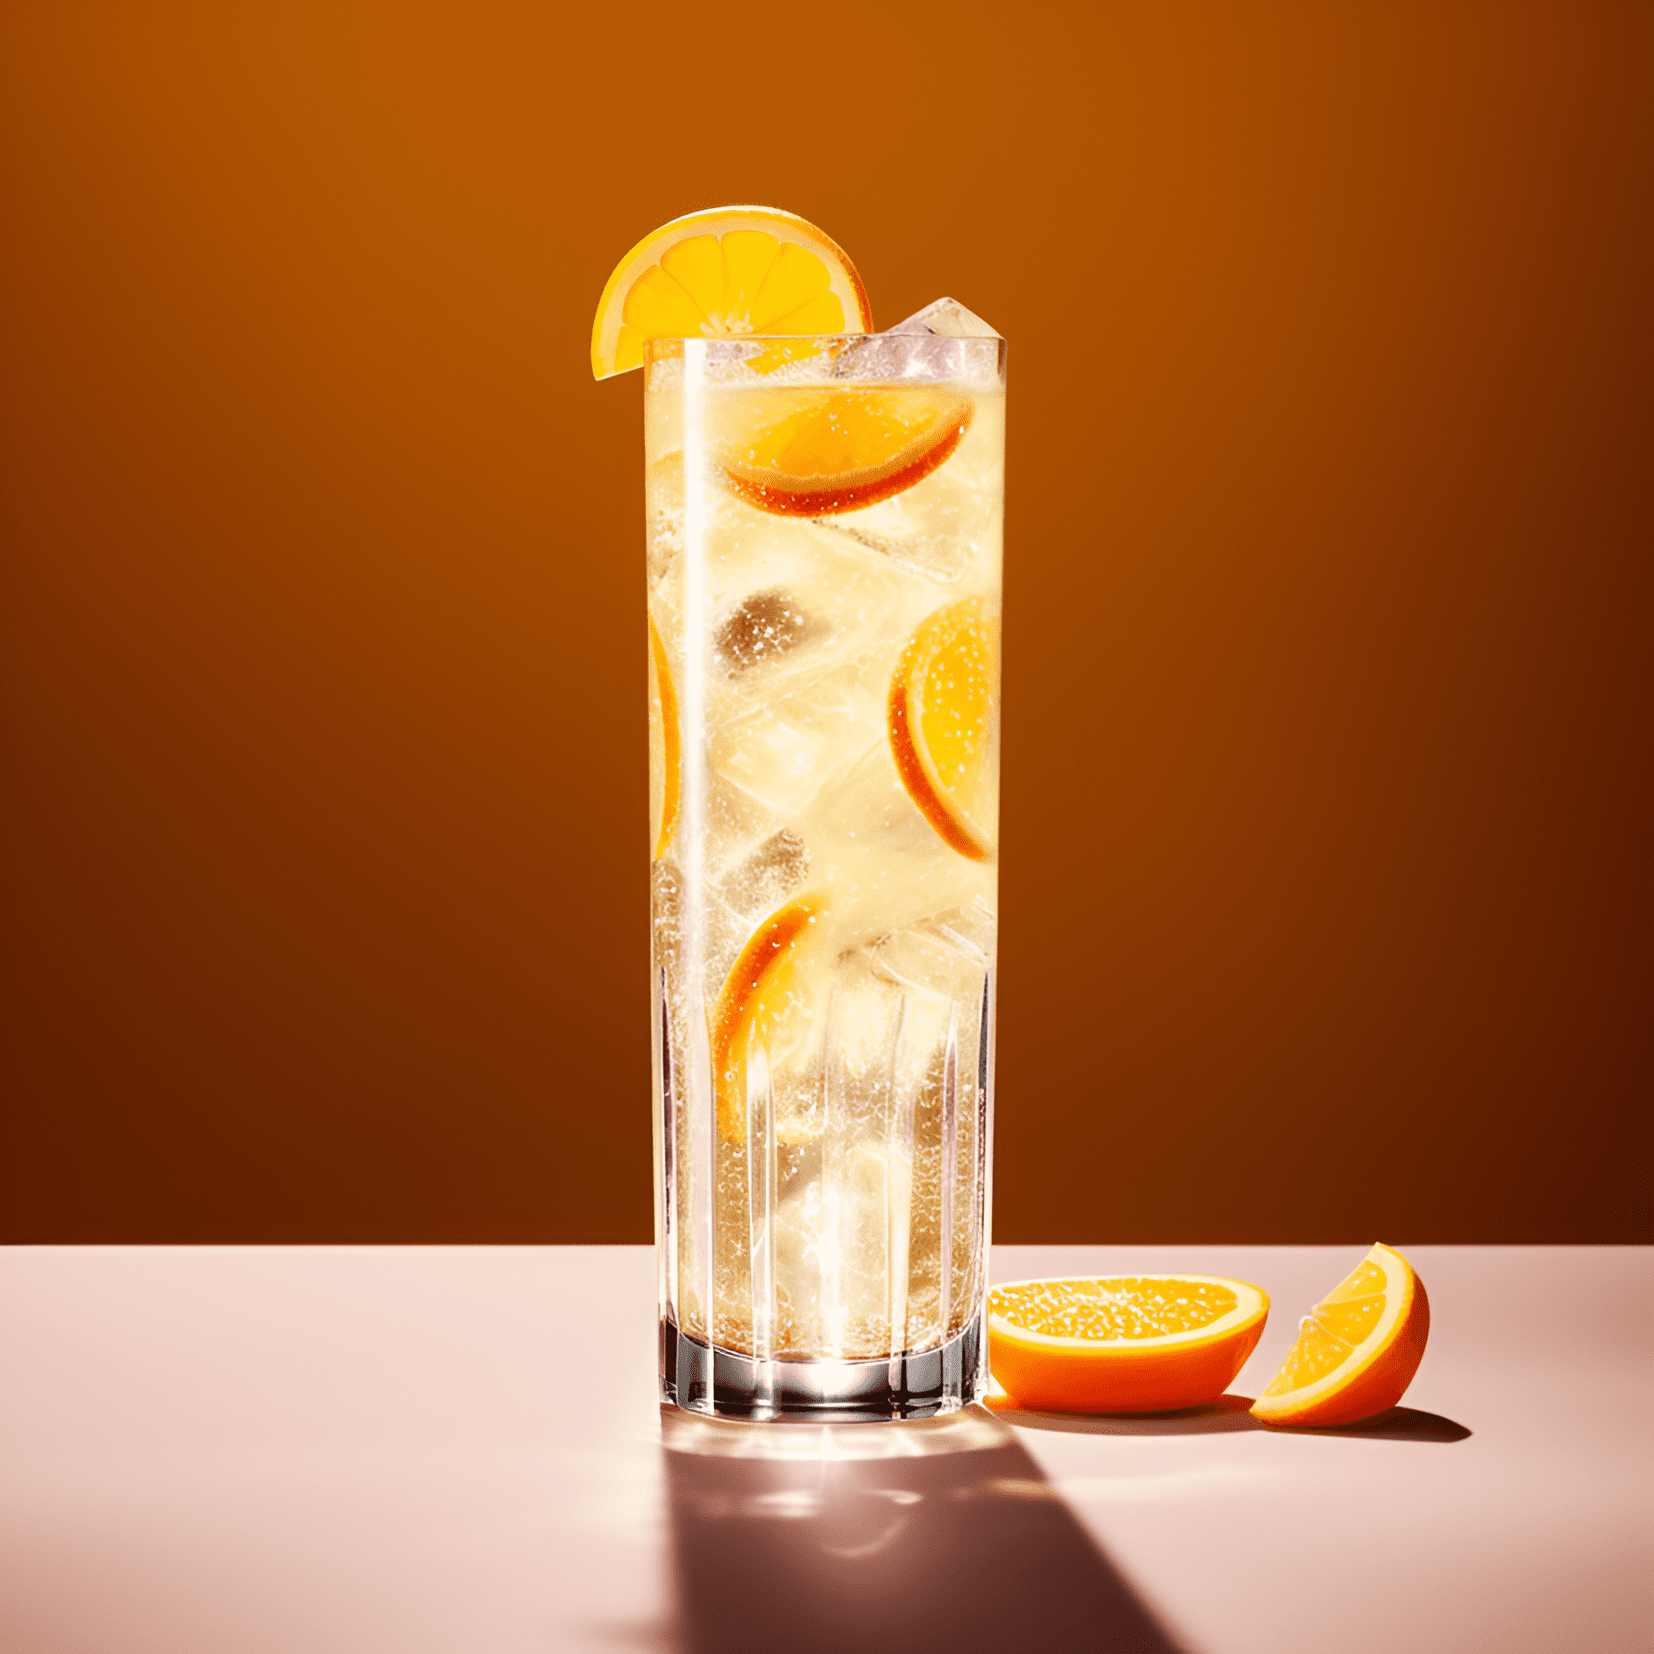 The Cointreau Fizz is a light, refreshing, and slightly sweet cocktail with a hint of tartness from the lime juice. The effervescence from the soda water adds a pleasant fizziness, while the Cointreau provides a subtle orange flavor.